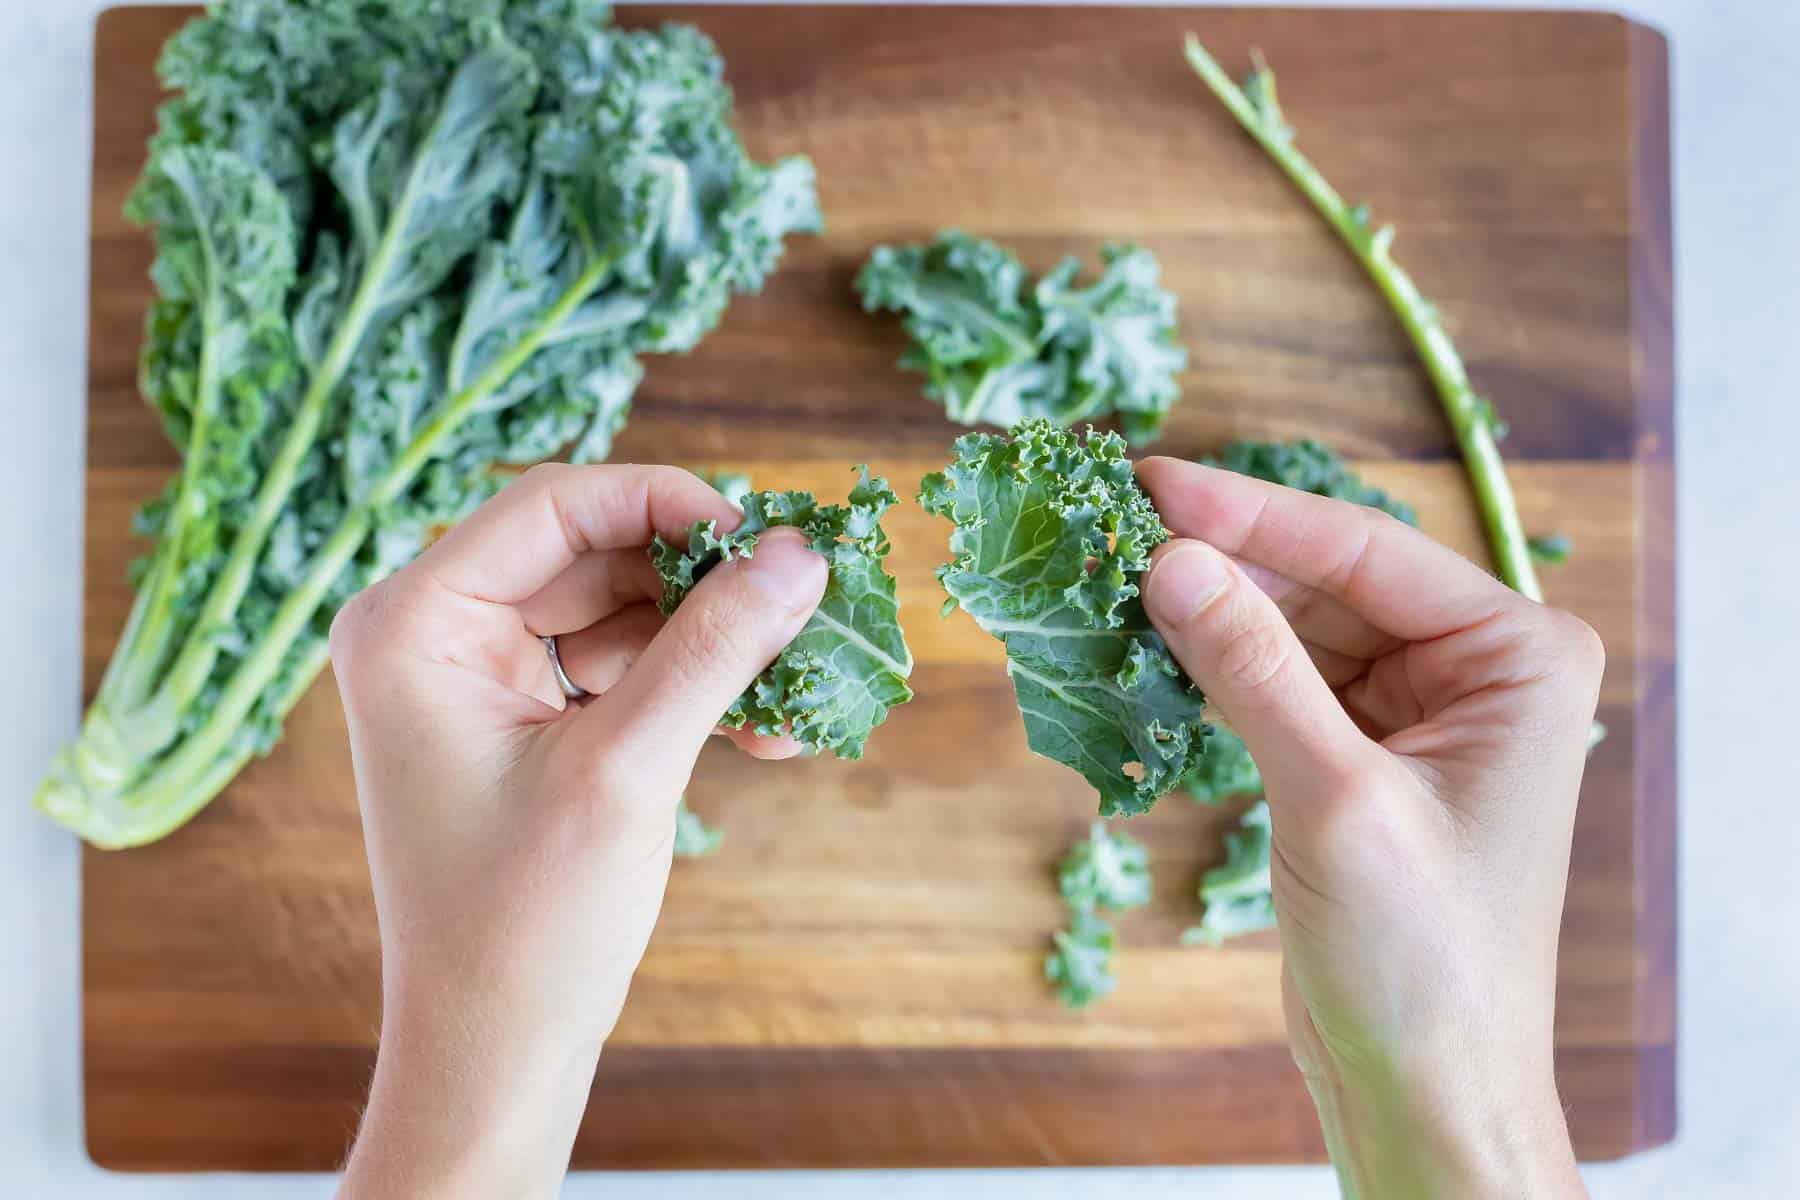 The fresh kale leaves are ripped into large chunks.